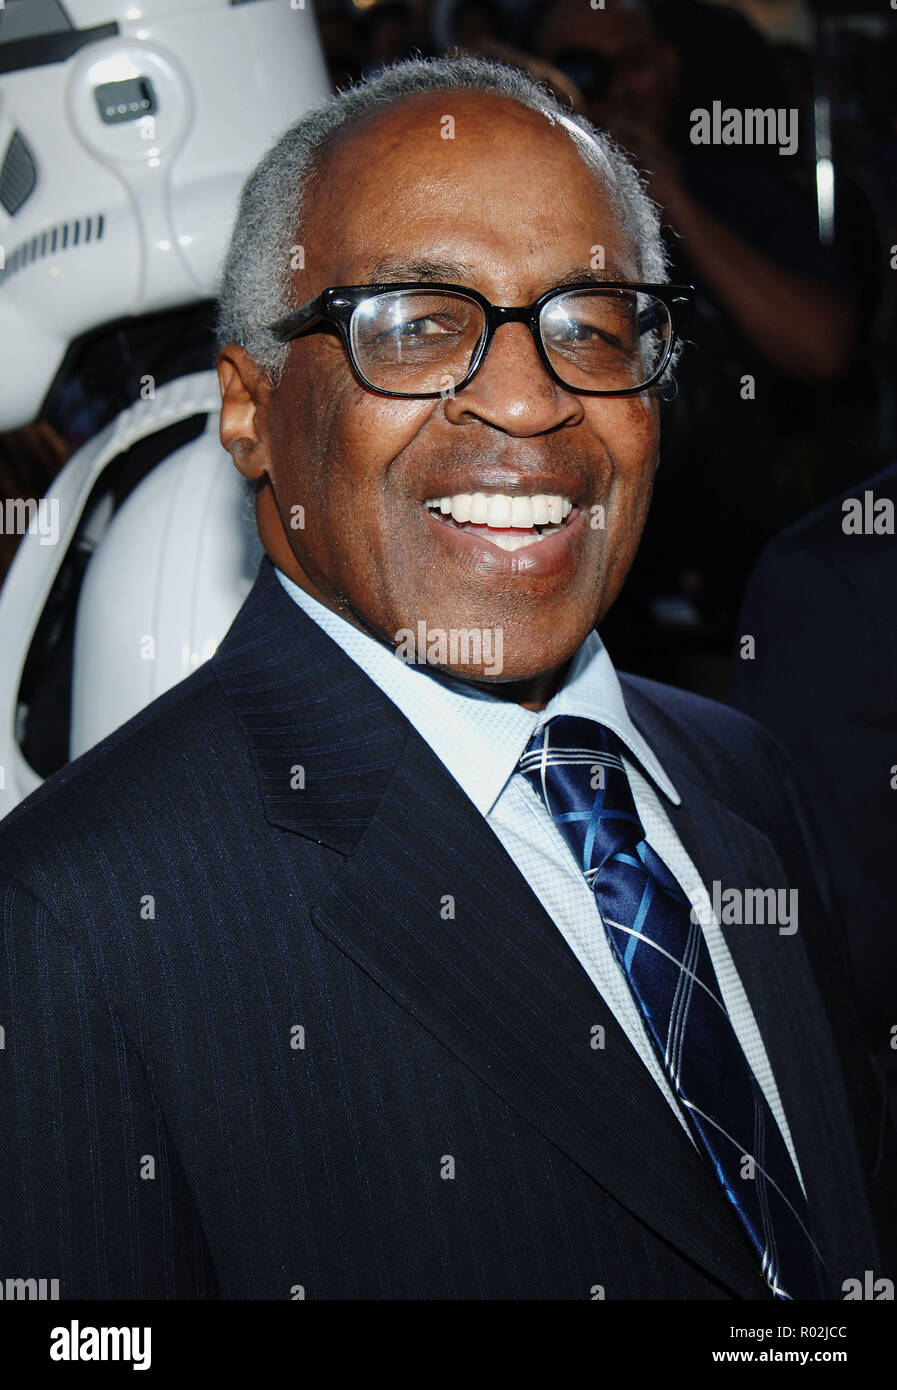 Robert Guillaume at the Star War III: Revenge of The Sith at the Westwood Village Theatre in Los Angeles. May 12, 2005.  GuilllaumeRobert053 Red Carpet Event, Vertical, USA, Film Industry, Celebrities,  Photography, Bestof, Arts Culture and Entertainment, Topix Celebrities fashion /  Vertical, Best of, Event in Hollywood Life - California,  Red Carpet and backstage, USA, Film Industry, Celebrities,  movie celebrities, TV celebrities, Music celebrities, Photography, Bestof, Arts Culture and Entertainment,  Topix, headshot, vertical, one person,, from the year , 2005, inquiry tsuni@Gamma-USA.com Stock Photo